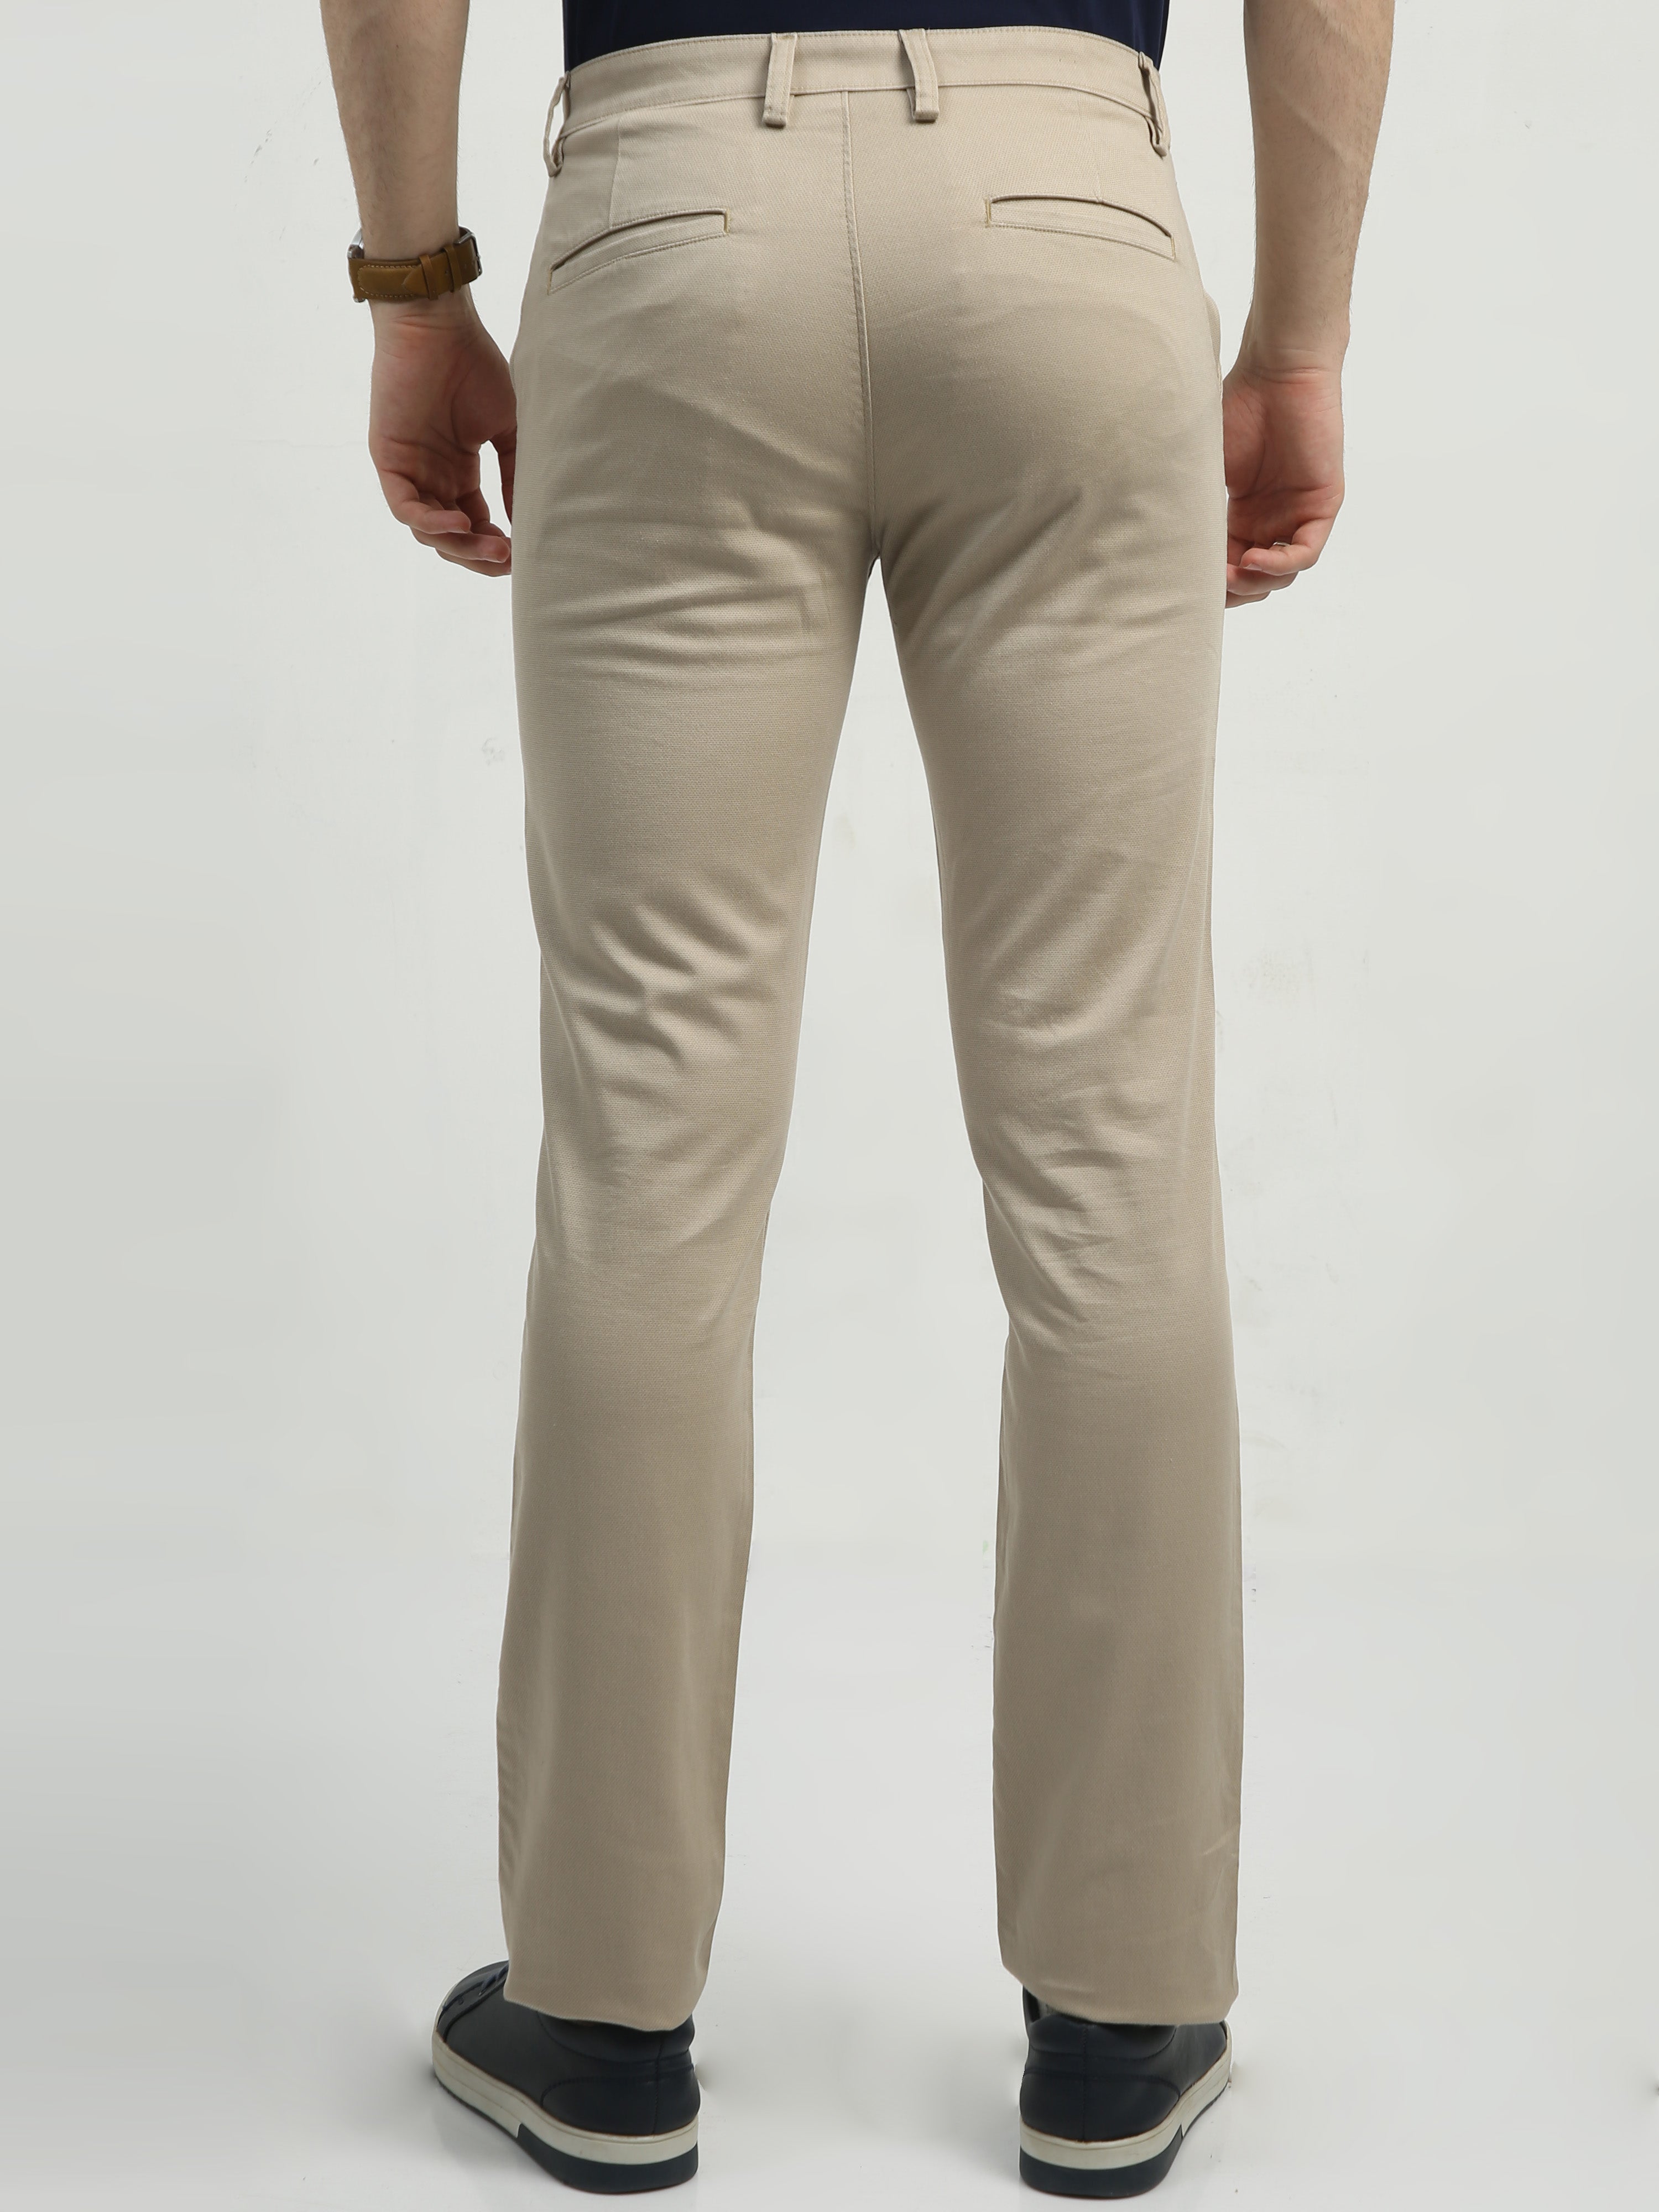 Classic Polo Men's   Chiseled Fit Cotton Trousers | TBO2-29 A-FAW-CF-LY